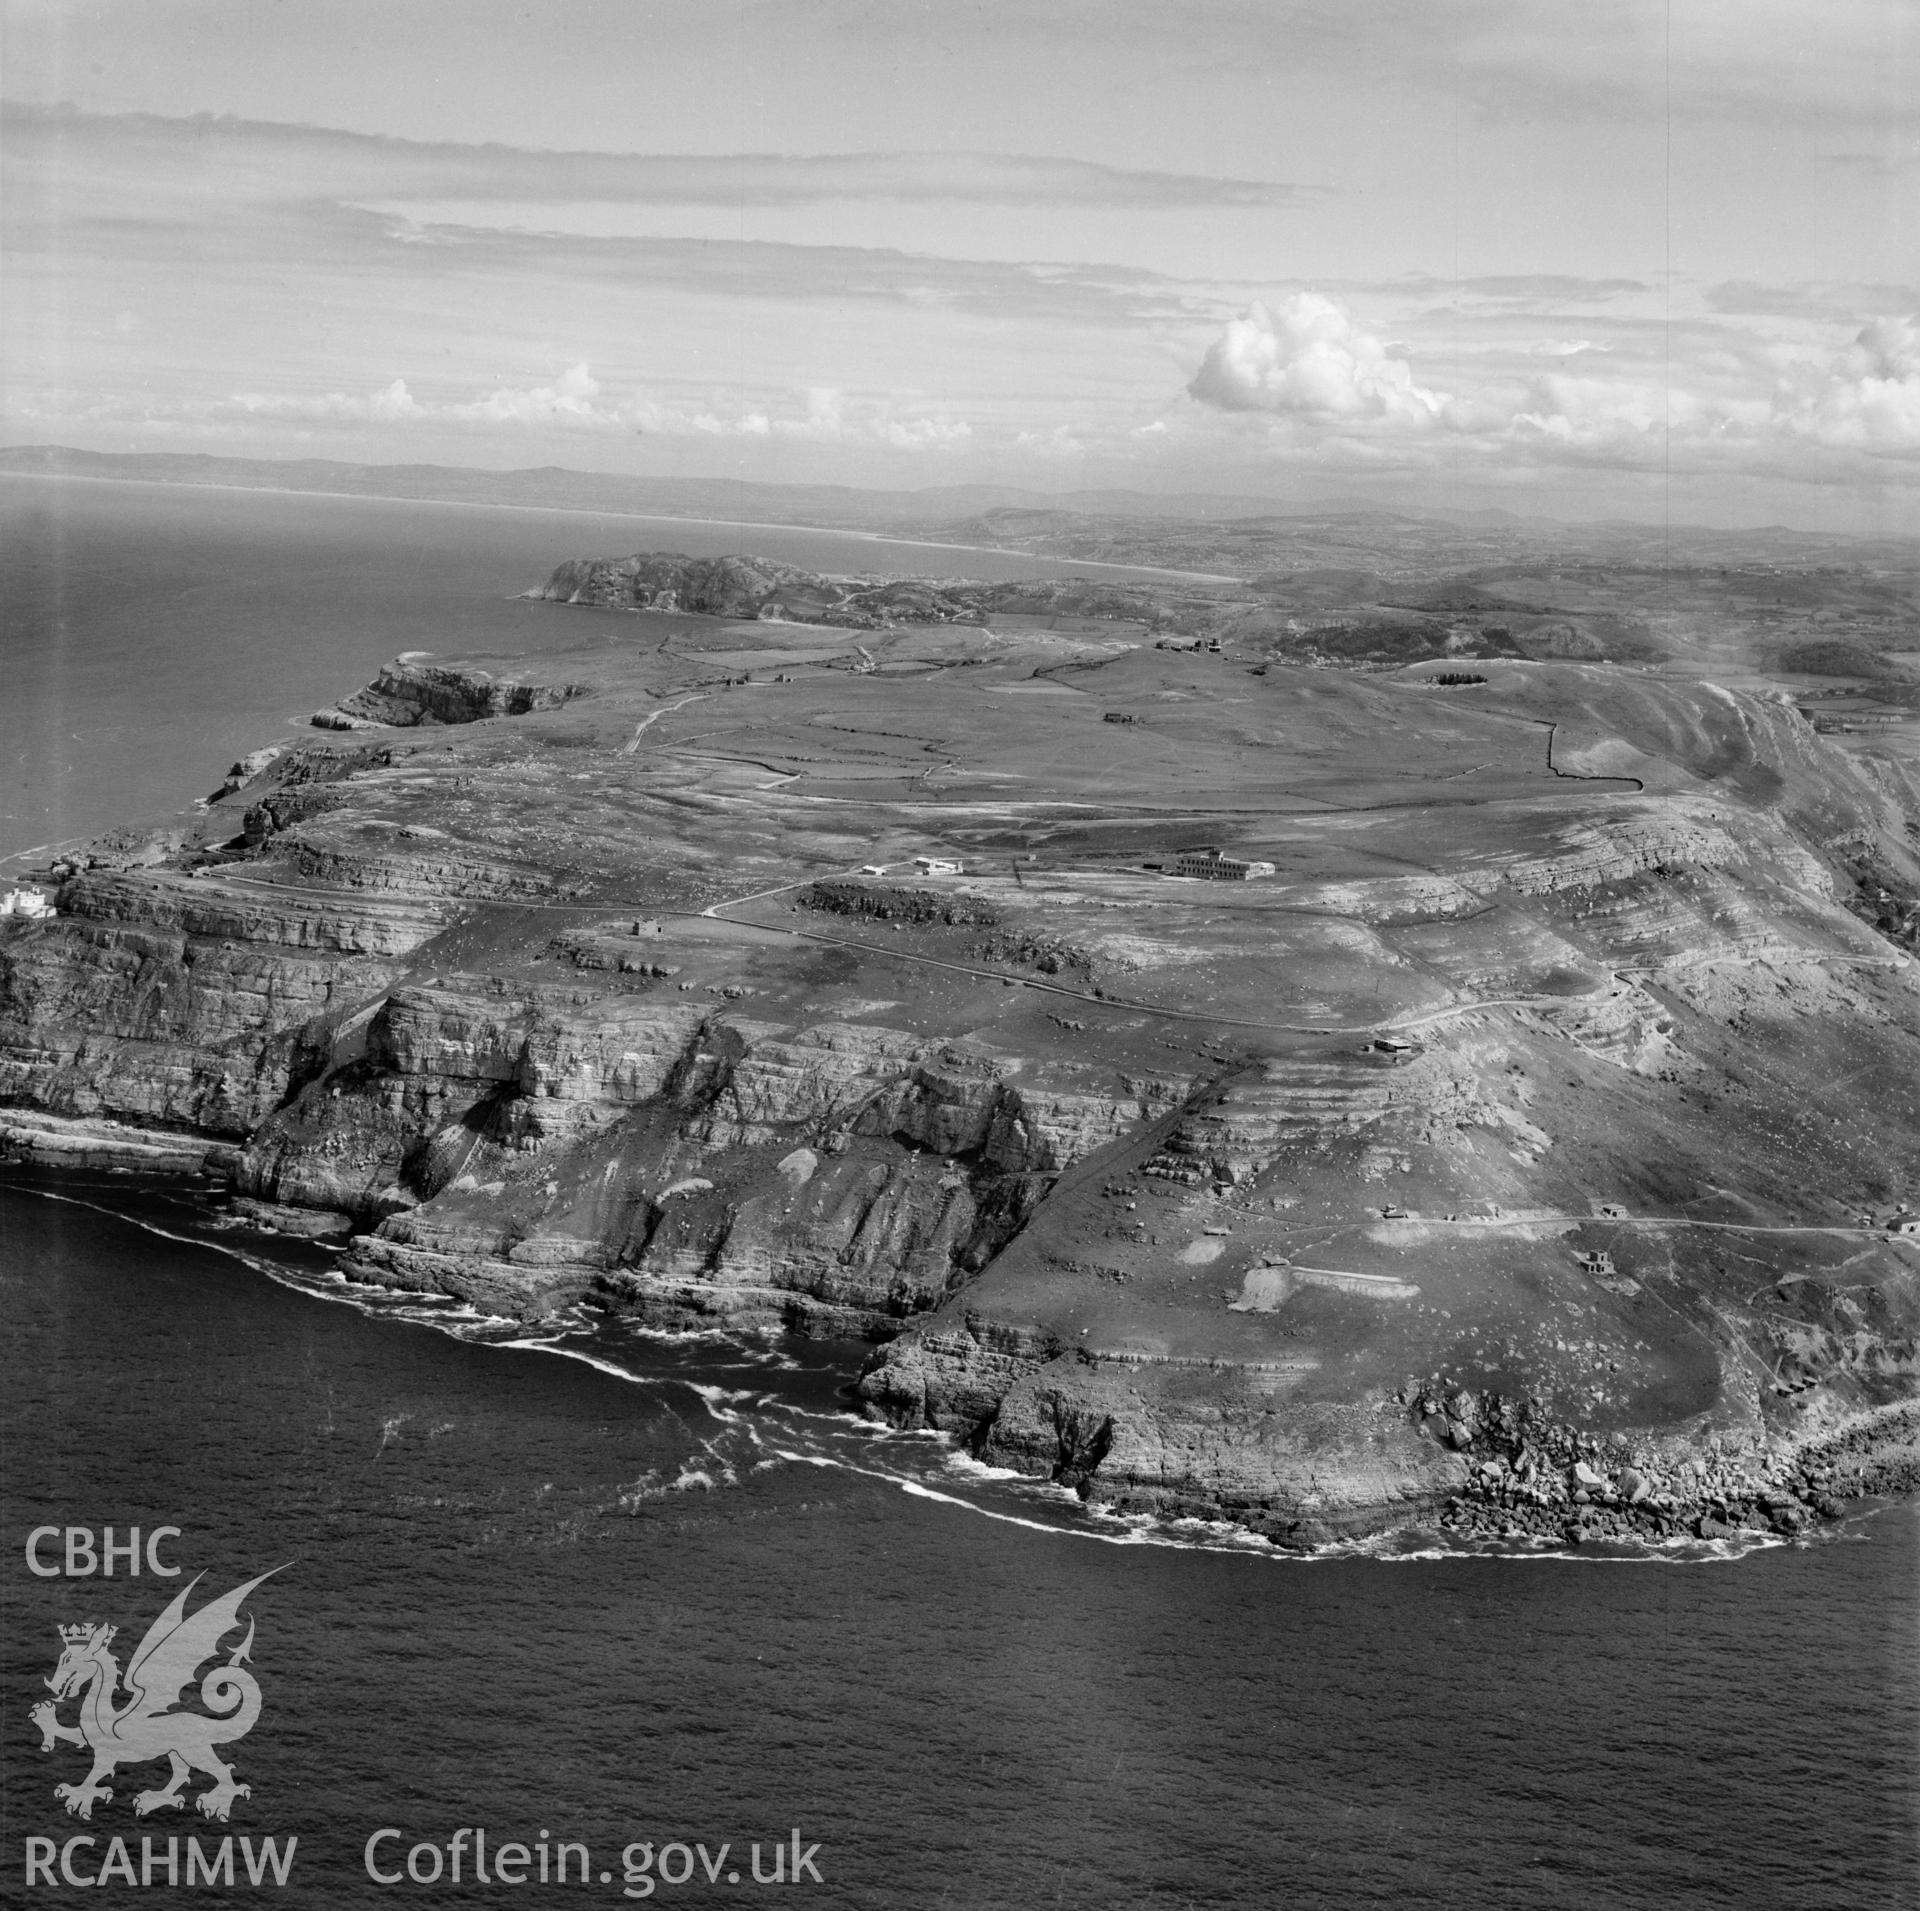 View of Great Orme showing structures associated with the former Royal Artillery Coast Artillery School